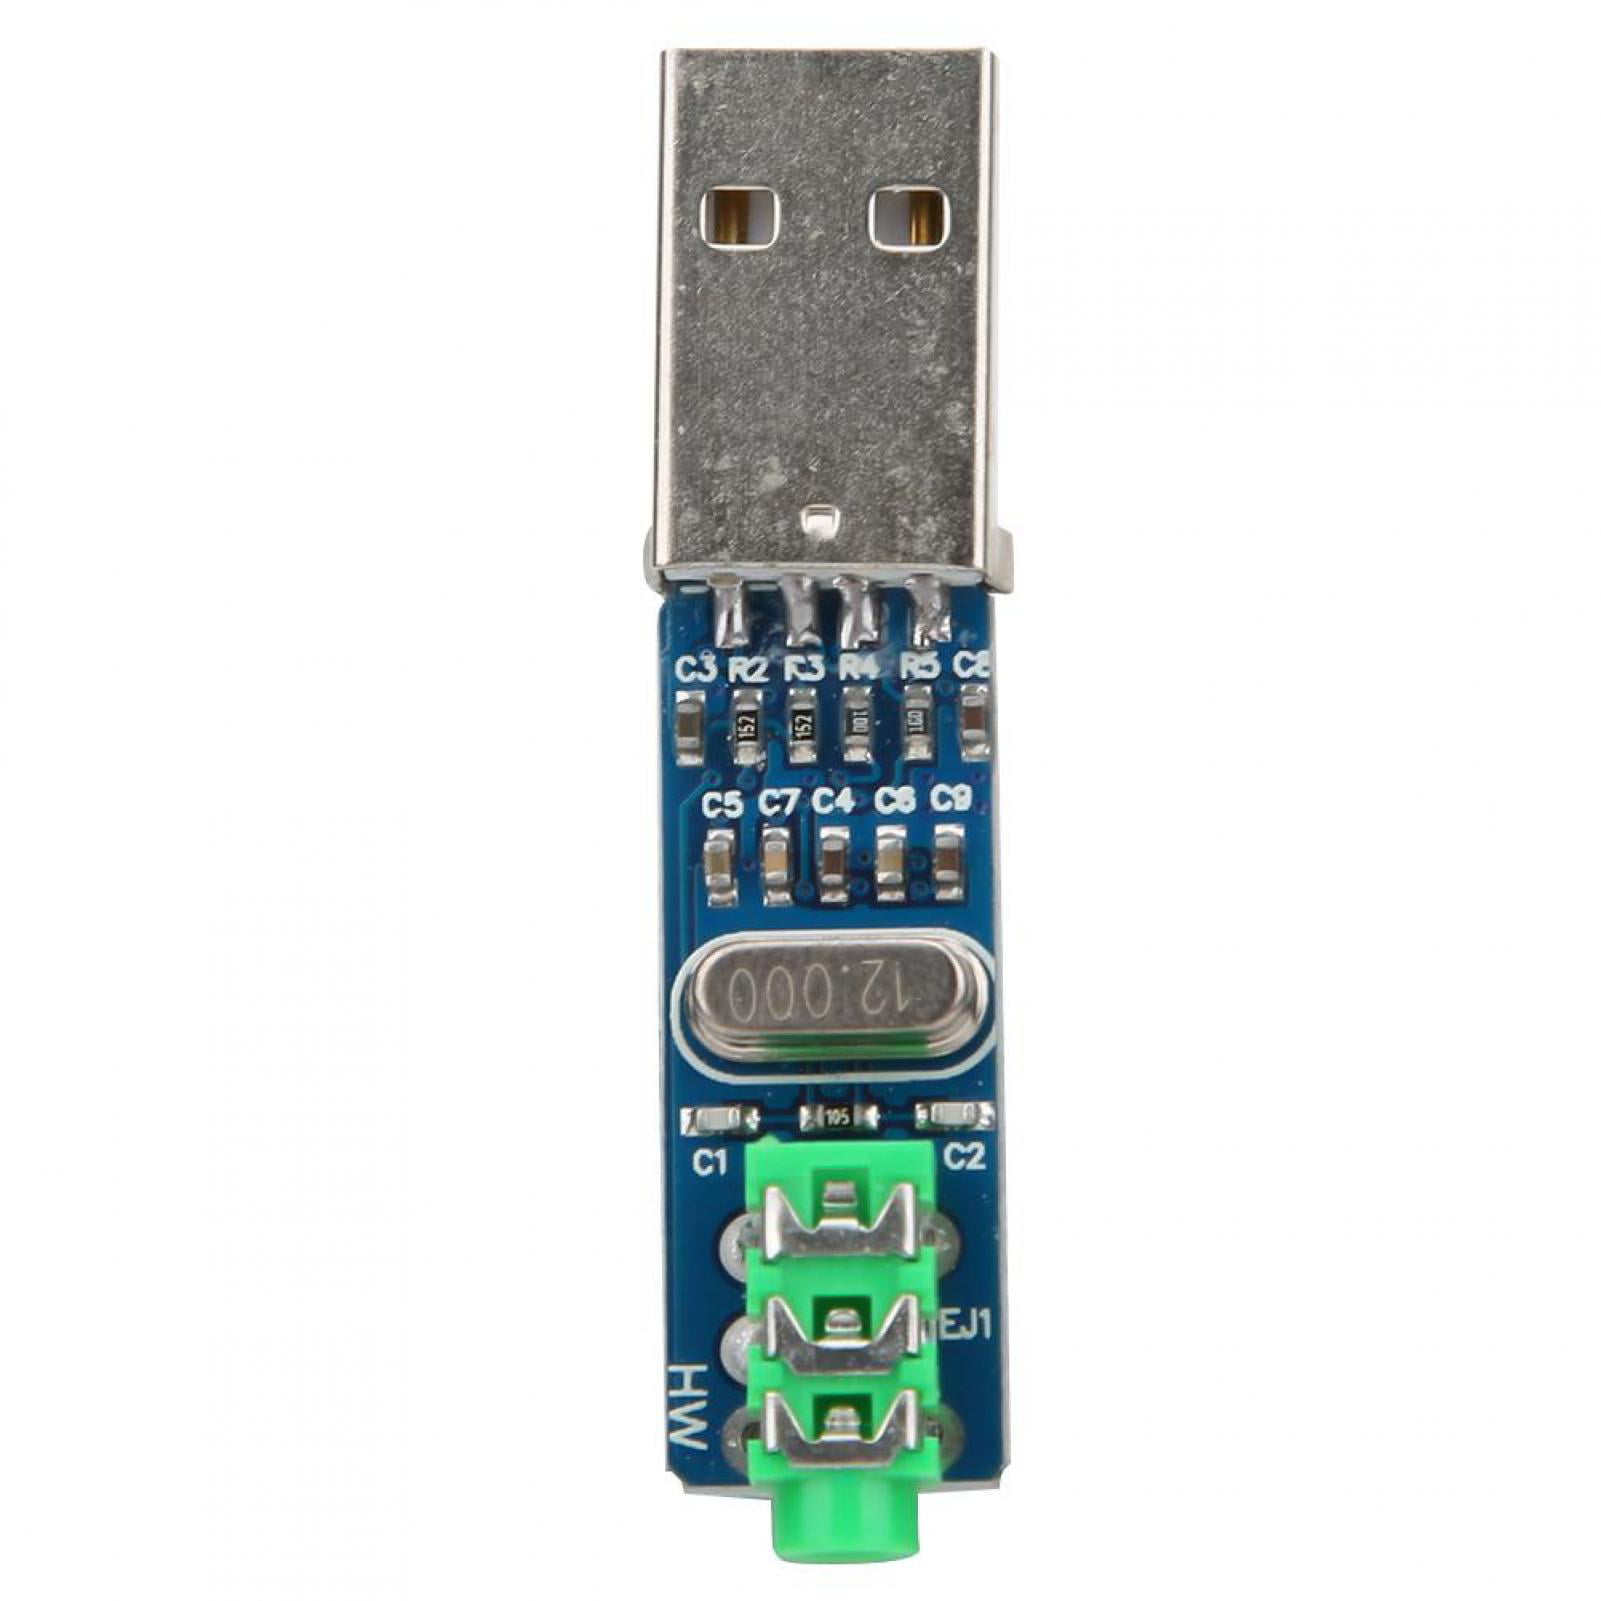 PCM2704 USB DAC USB to S/PDIF Sound Card Decoder Board W/Aluminum For Computer